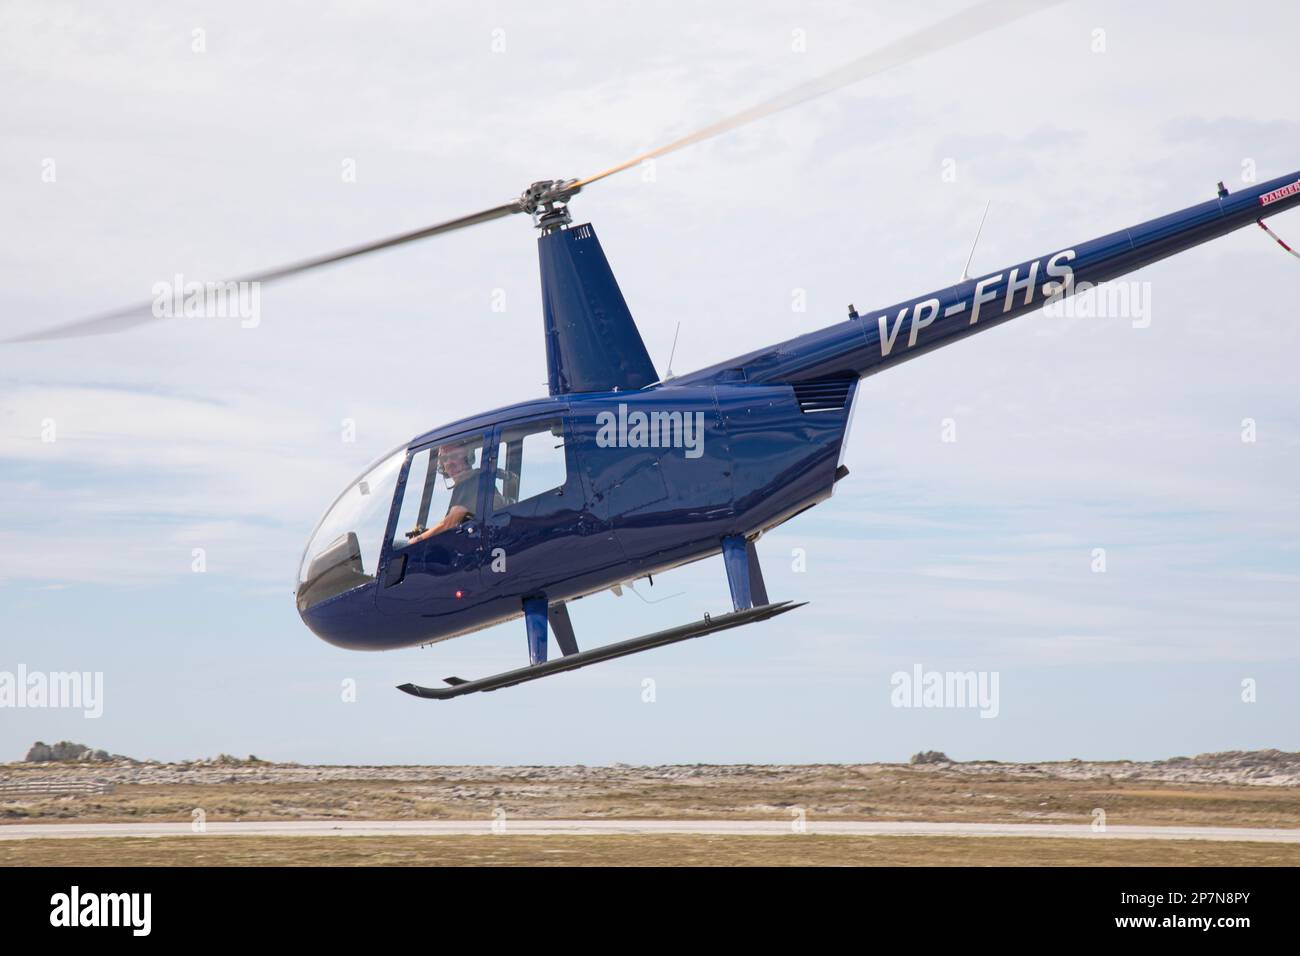 A Robinson R-44 Raven II helicopter, registration number VP-FHS, taking off from Stanley Airport in The Falkland Islands. Stock Photo